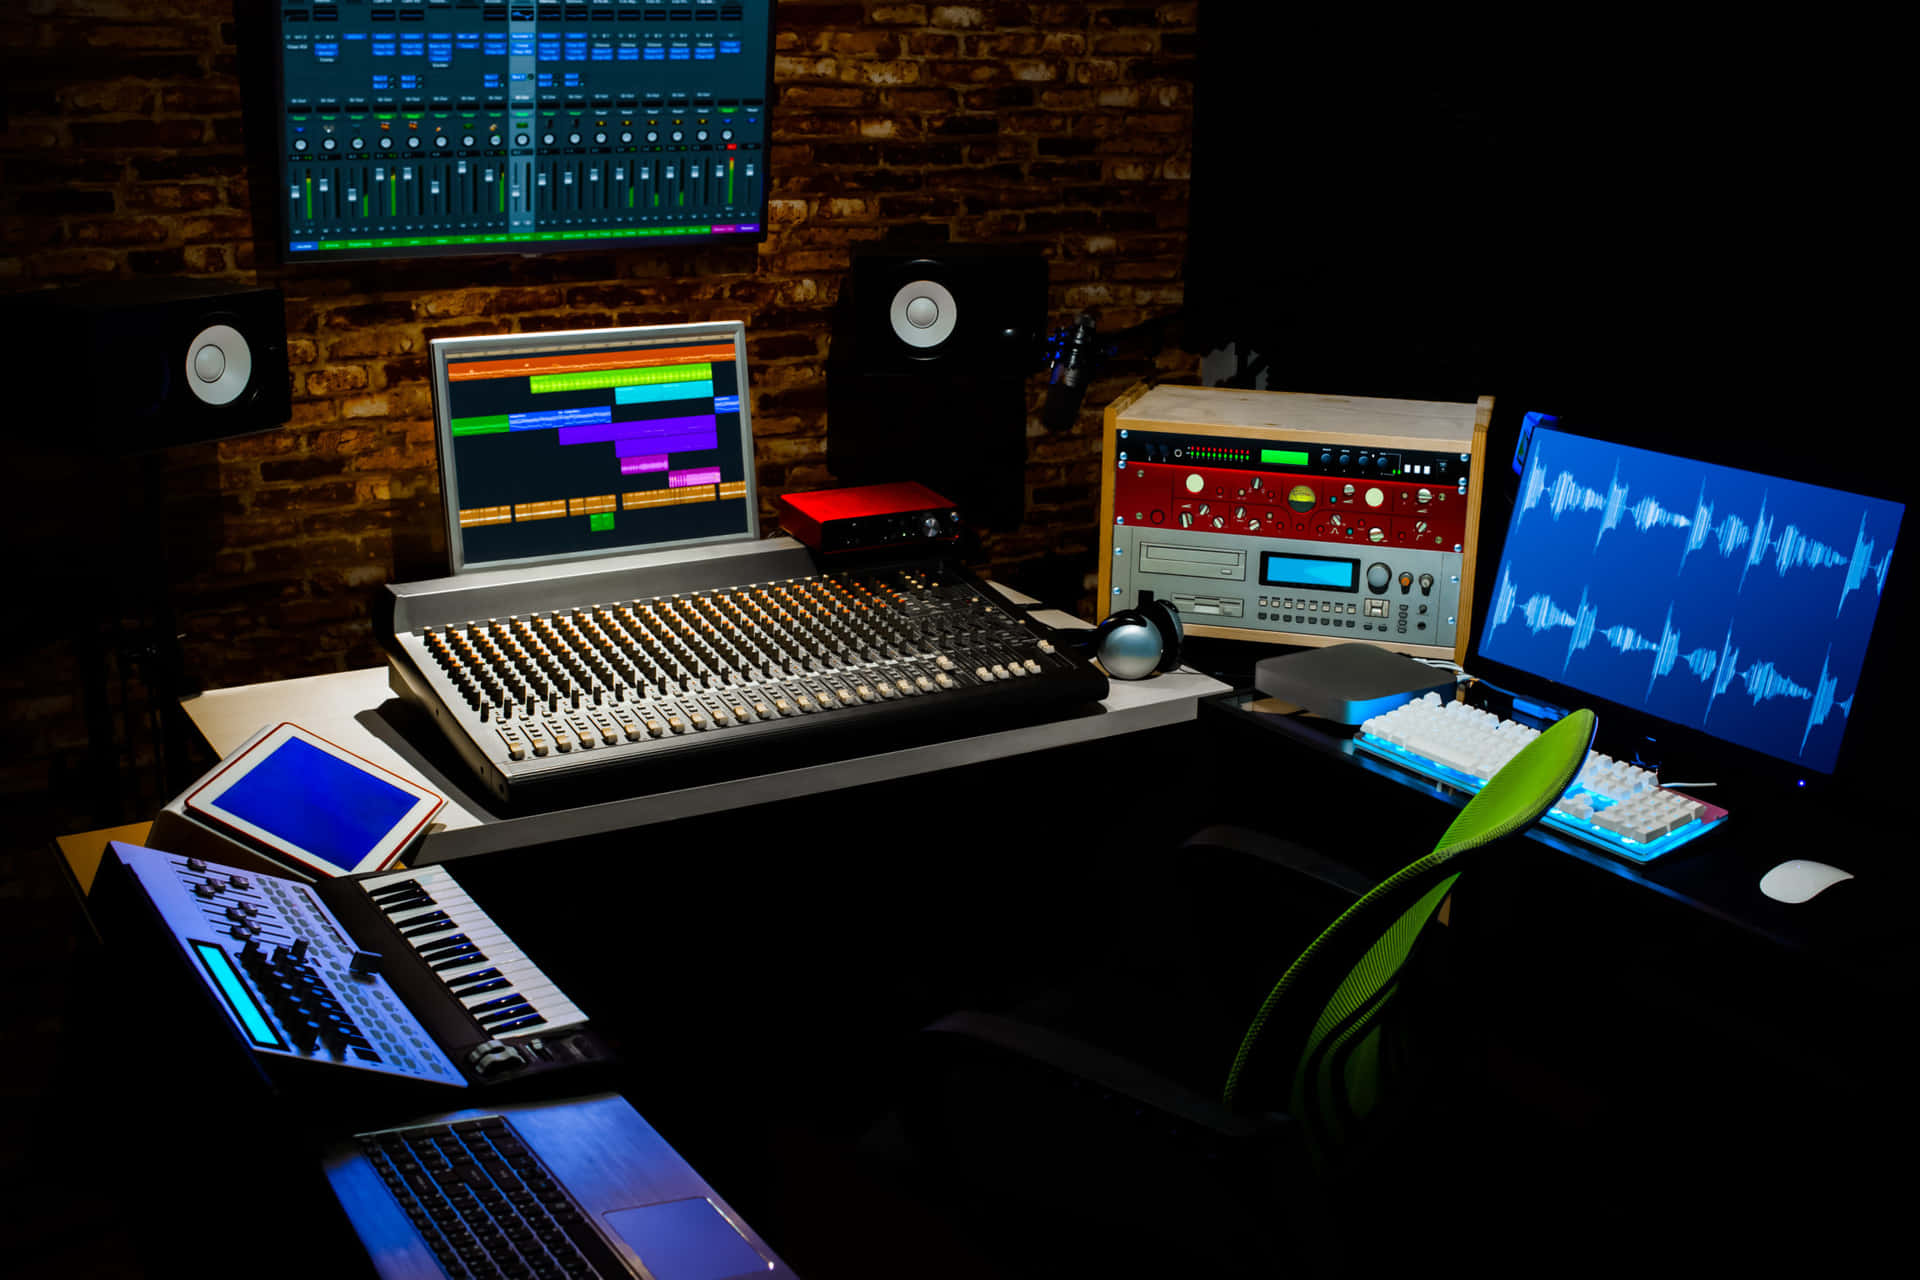 A Recording Studio With A Monitor, Keyboard, And Other Equipment